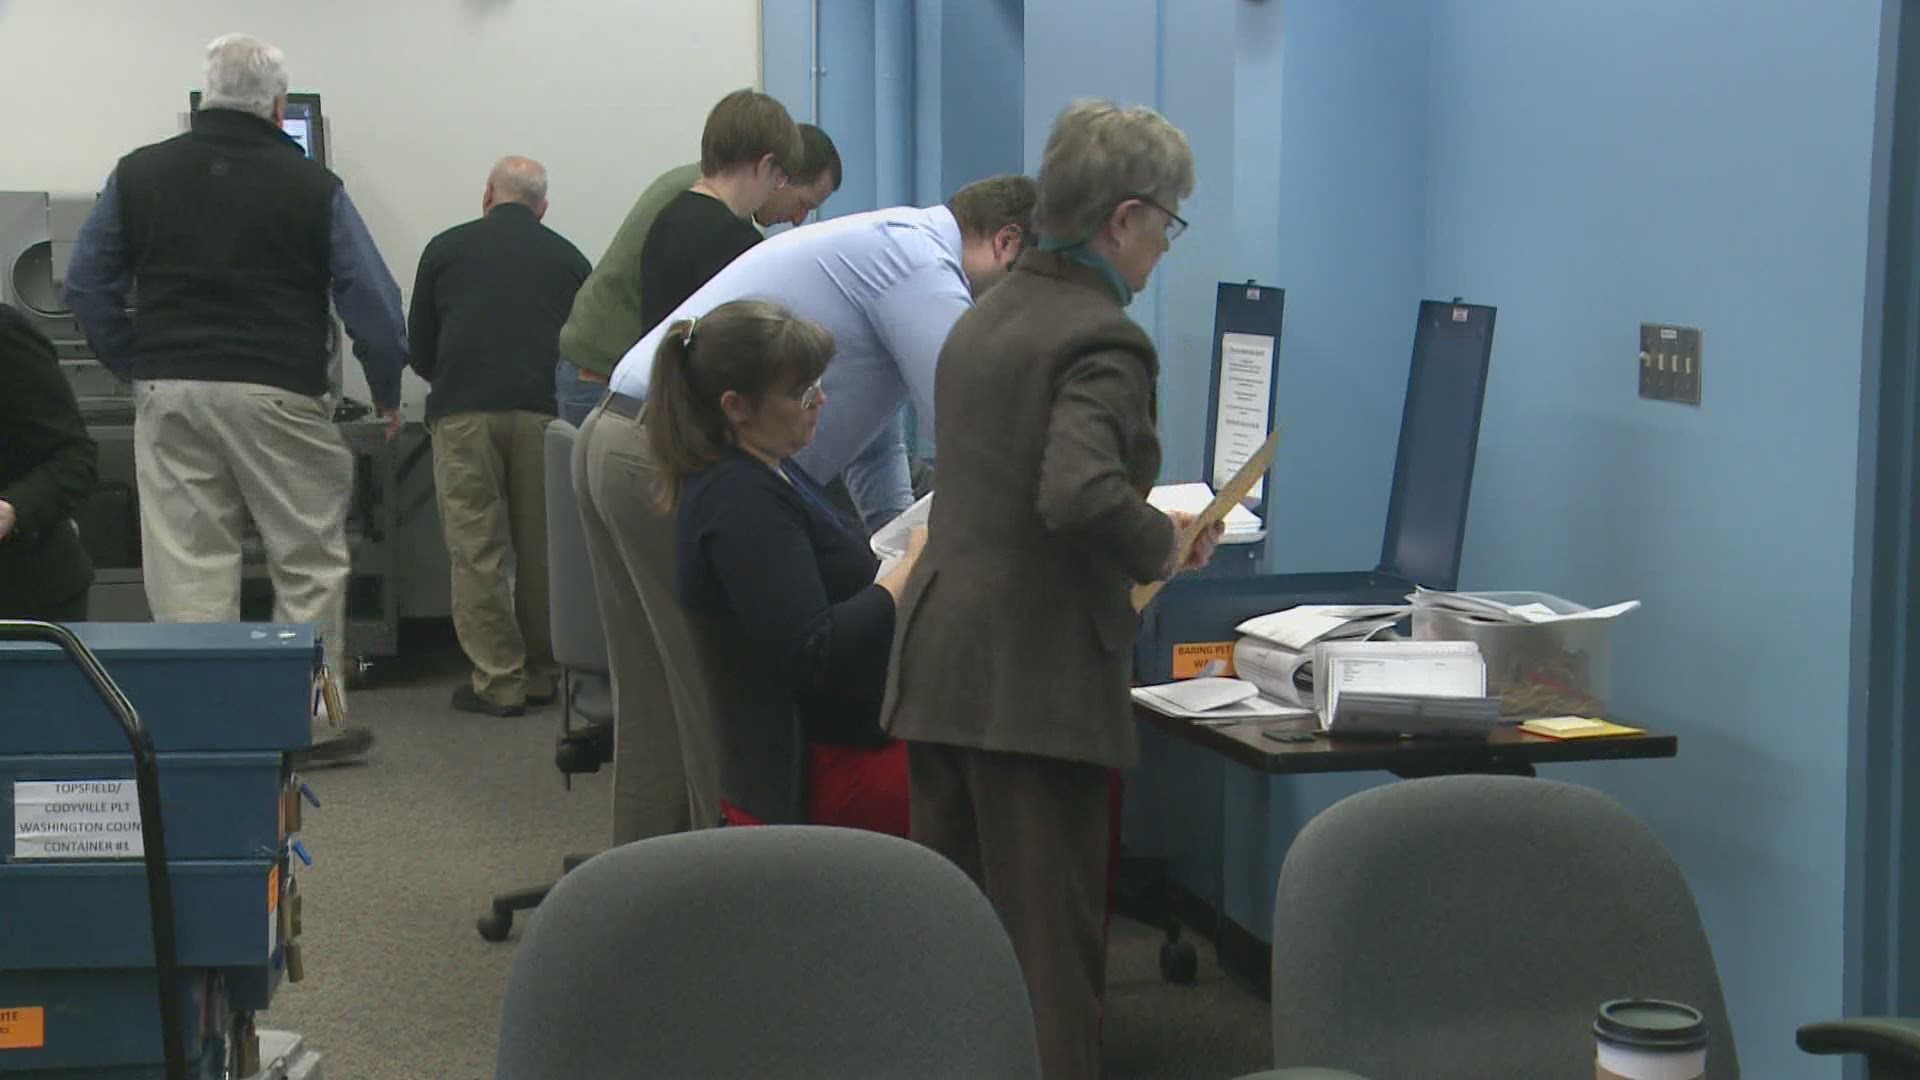 A problem with computer entry of ballots from the primary election in July forced the Secretary of State's office to run some of the ranked choice votes again.